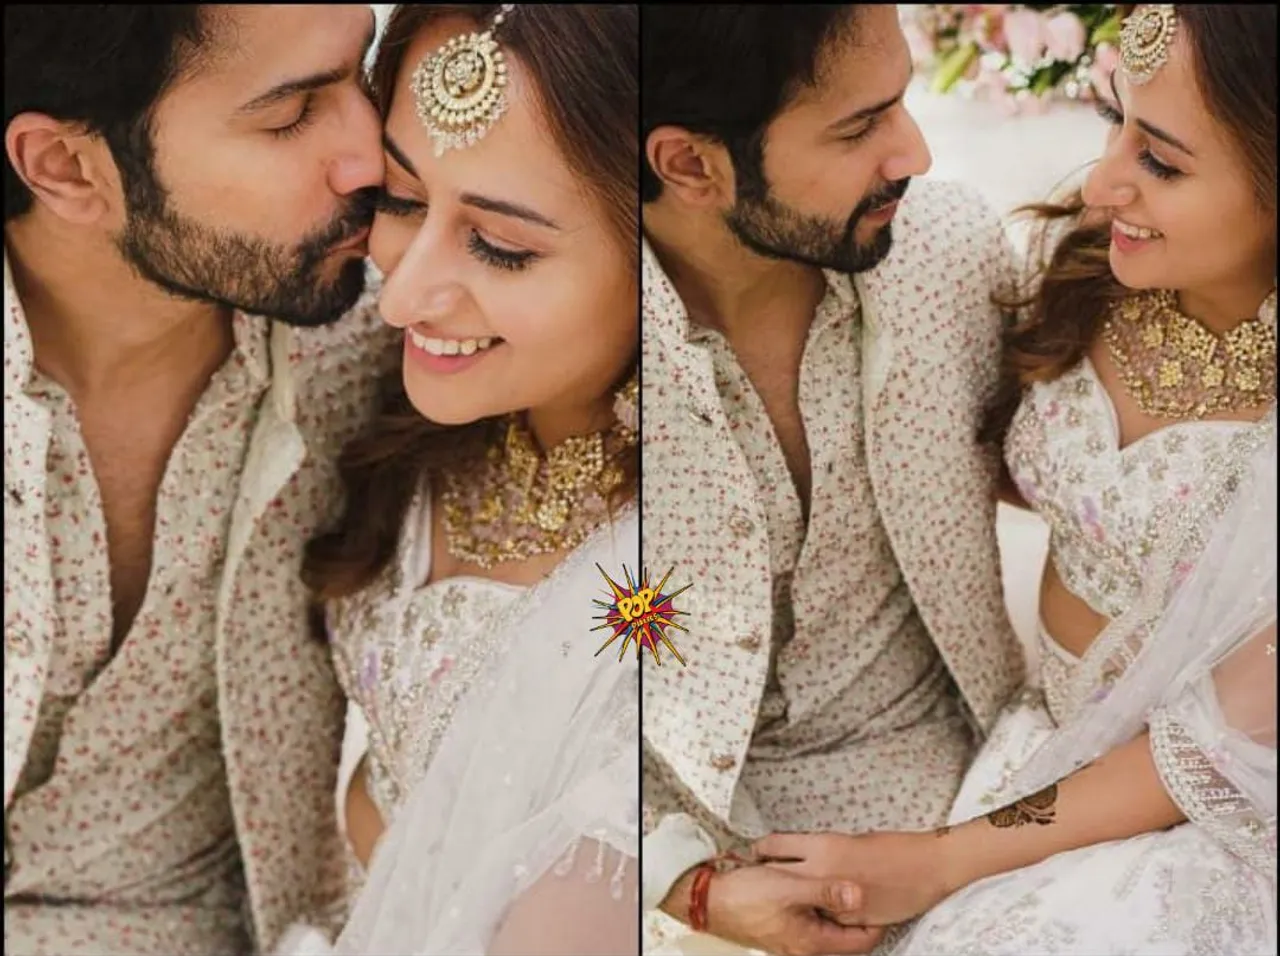 On the first marriage anniversary Varun Dhawan posts some throwback pictures from his wedding.